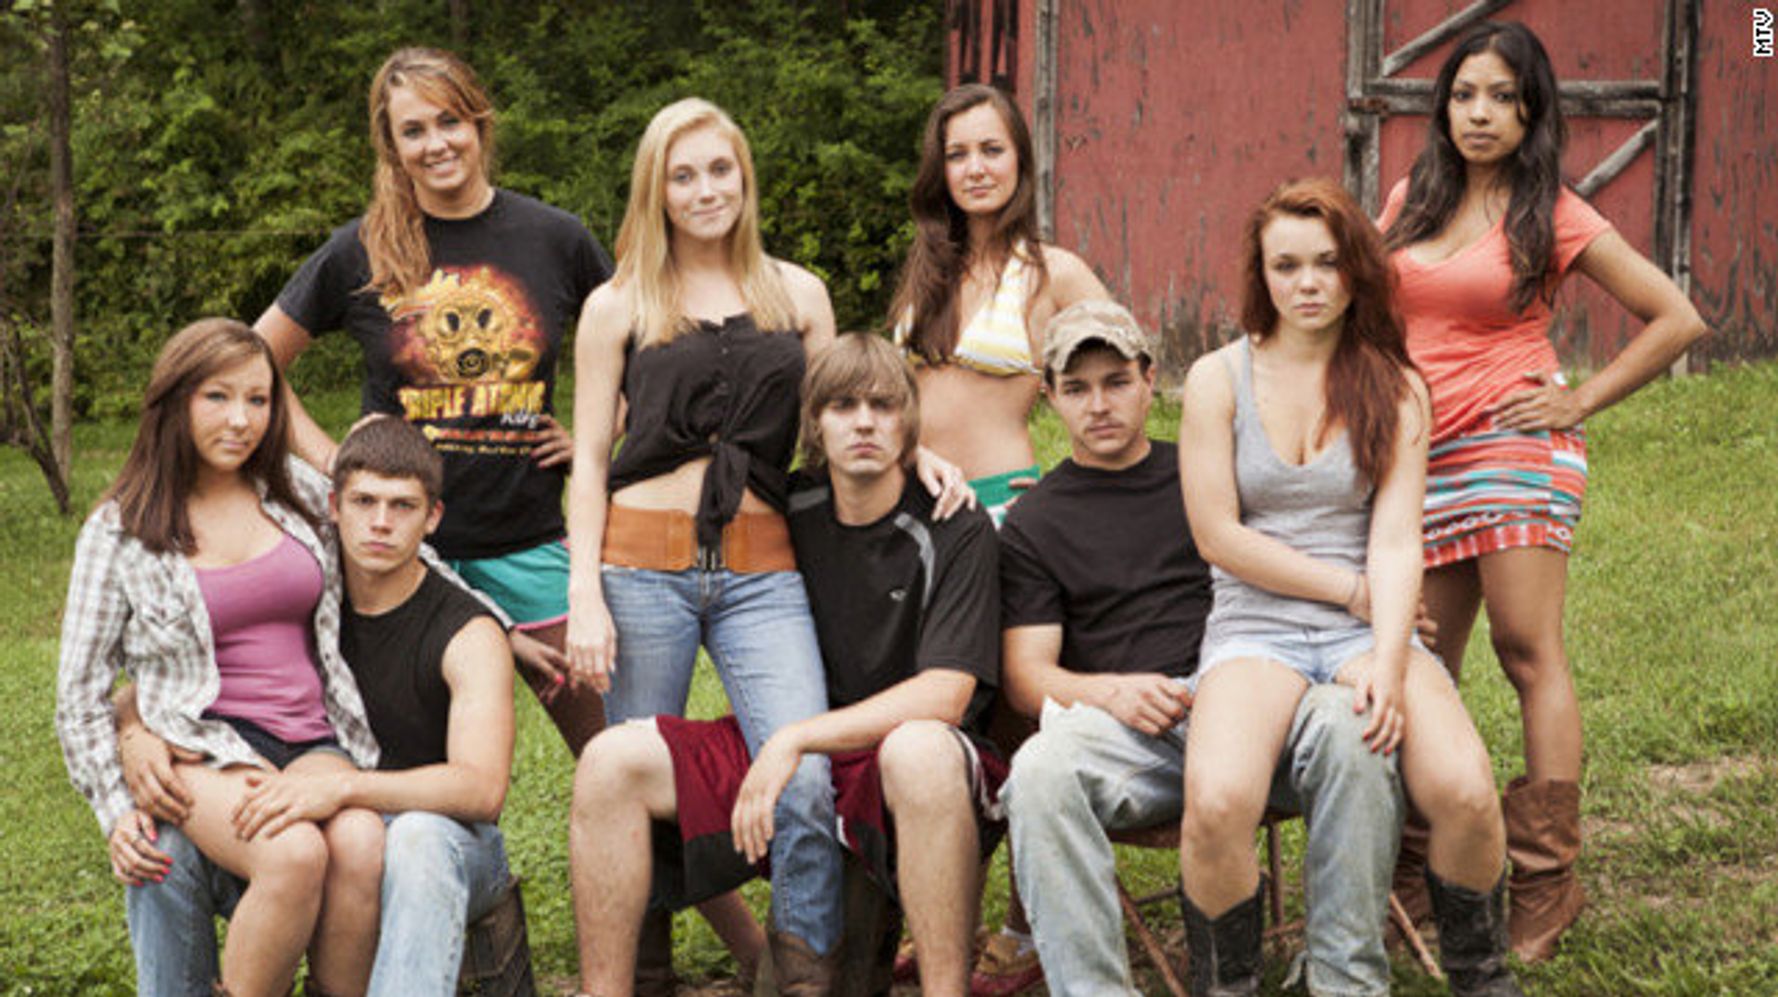 Jason Linkins and Paige Lavender discuss Buckwild, a reality show on West V...